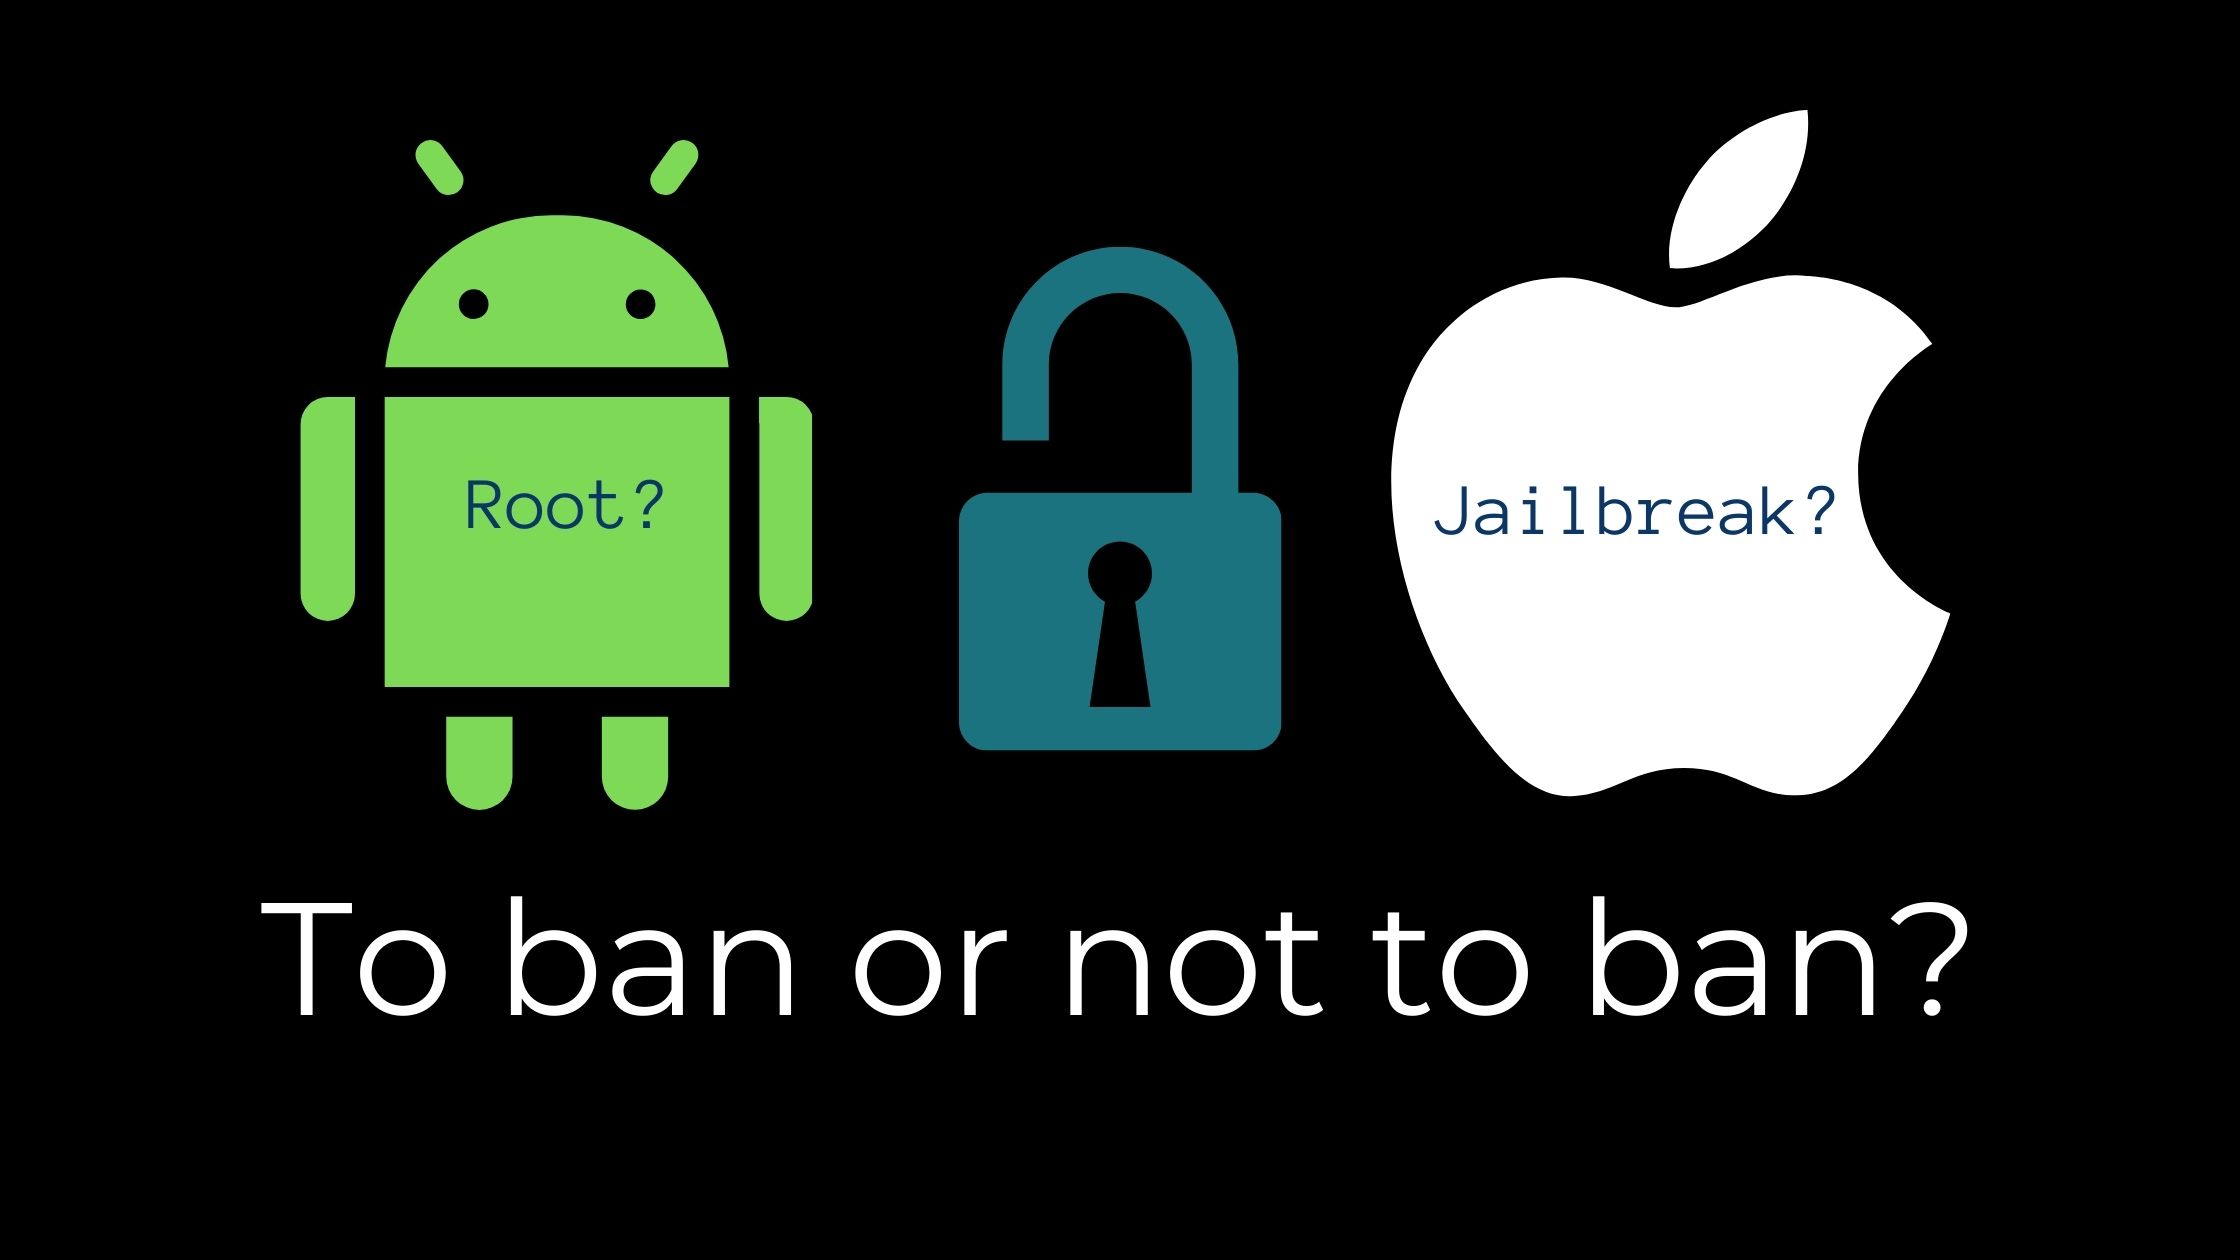 You can now jailbreak an iPhone with an Android phone